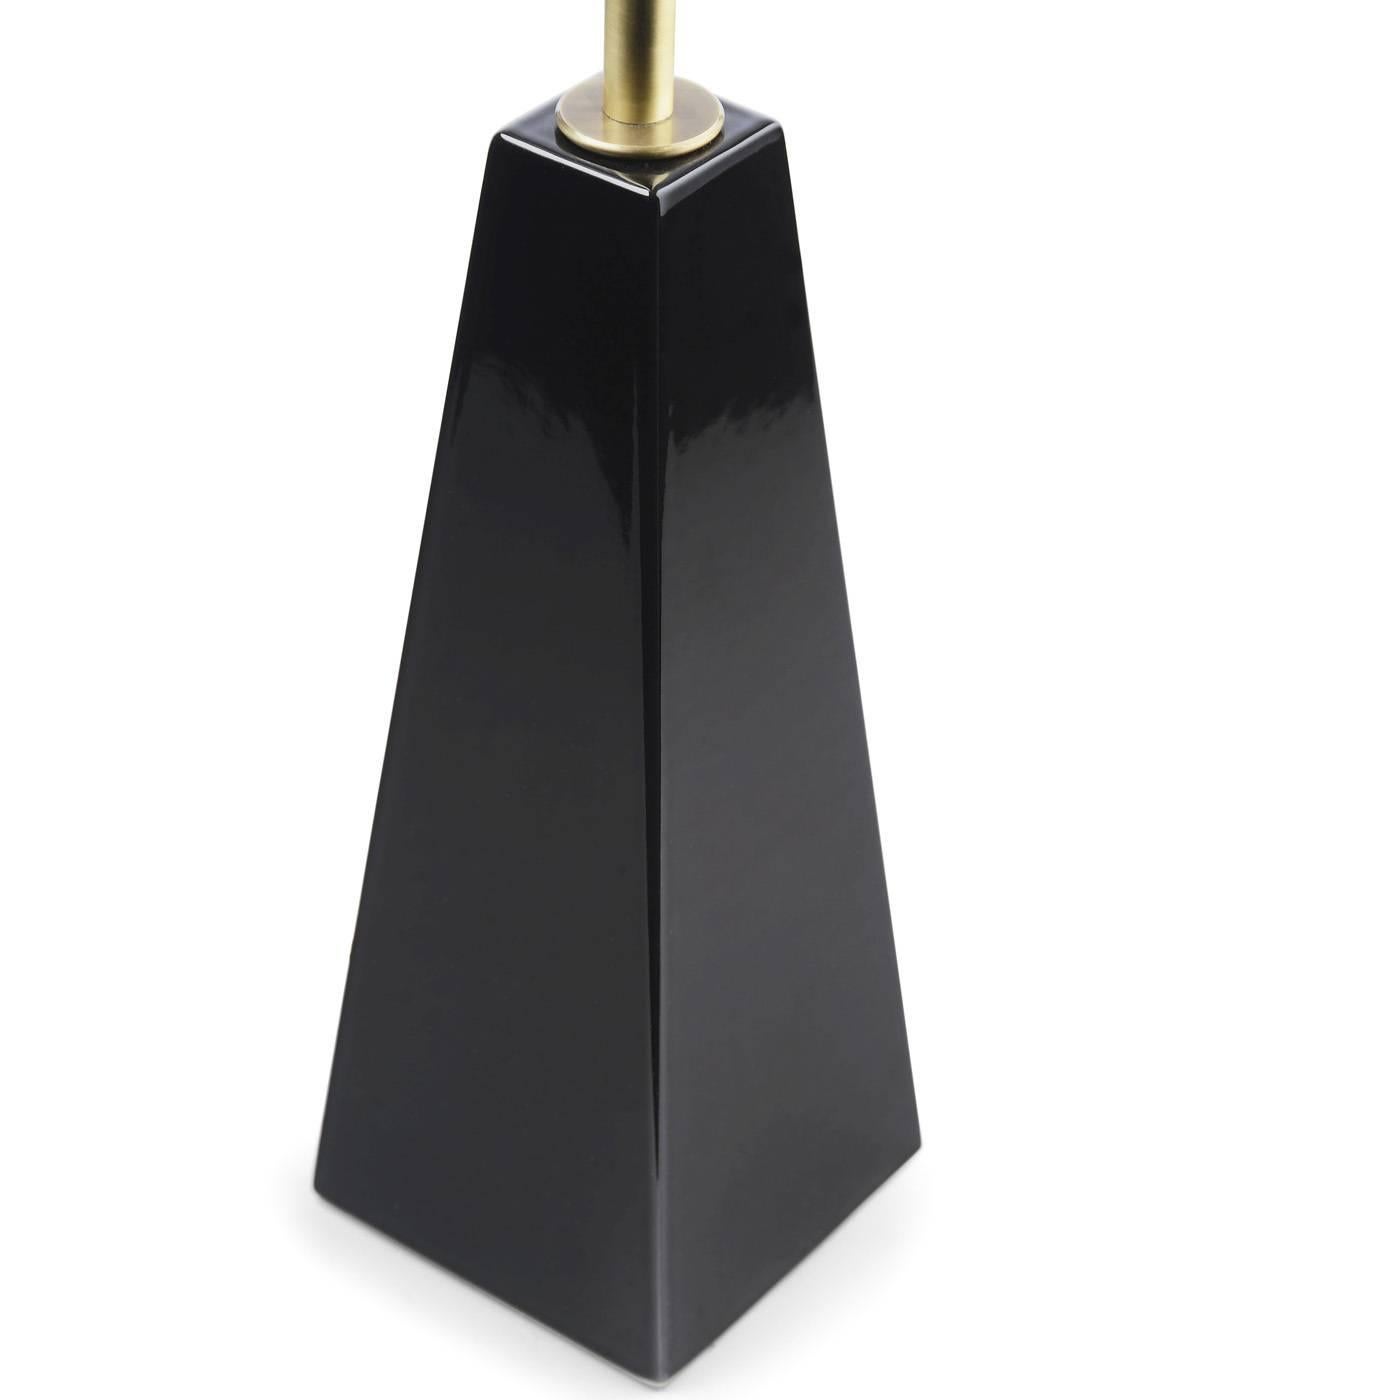 The base of this elegant lamp, designed by Studio 63 for Marioni, is a pyramid in black ceramic. The body is in brass with a cylindrical diffusor that features a decoration of vertical ridges.